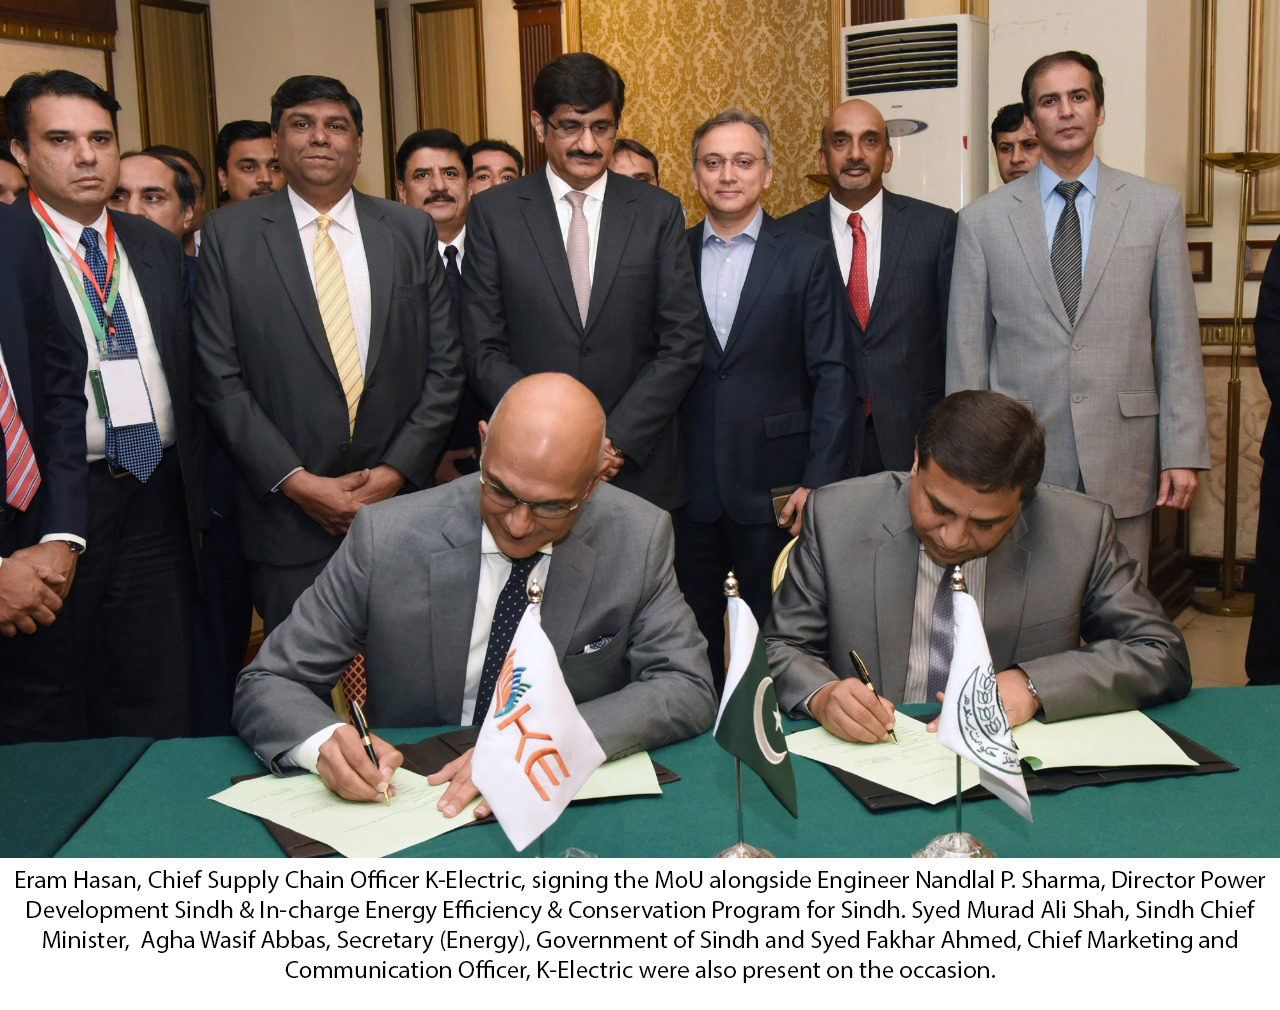 K-Electric & Government of Sindh Ink MoU to Promote Energy Conservation